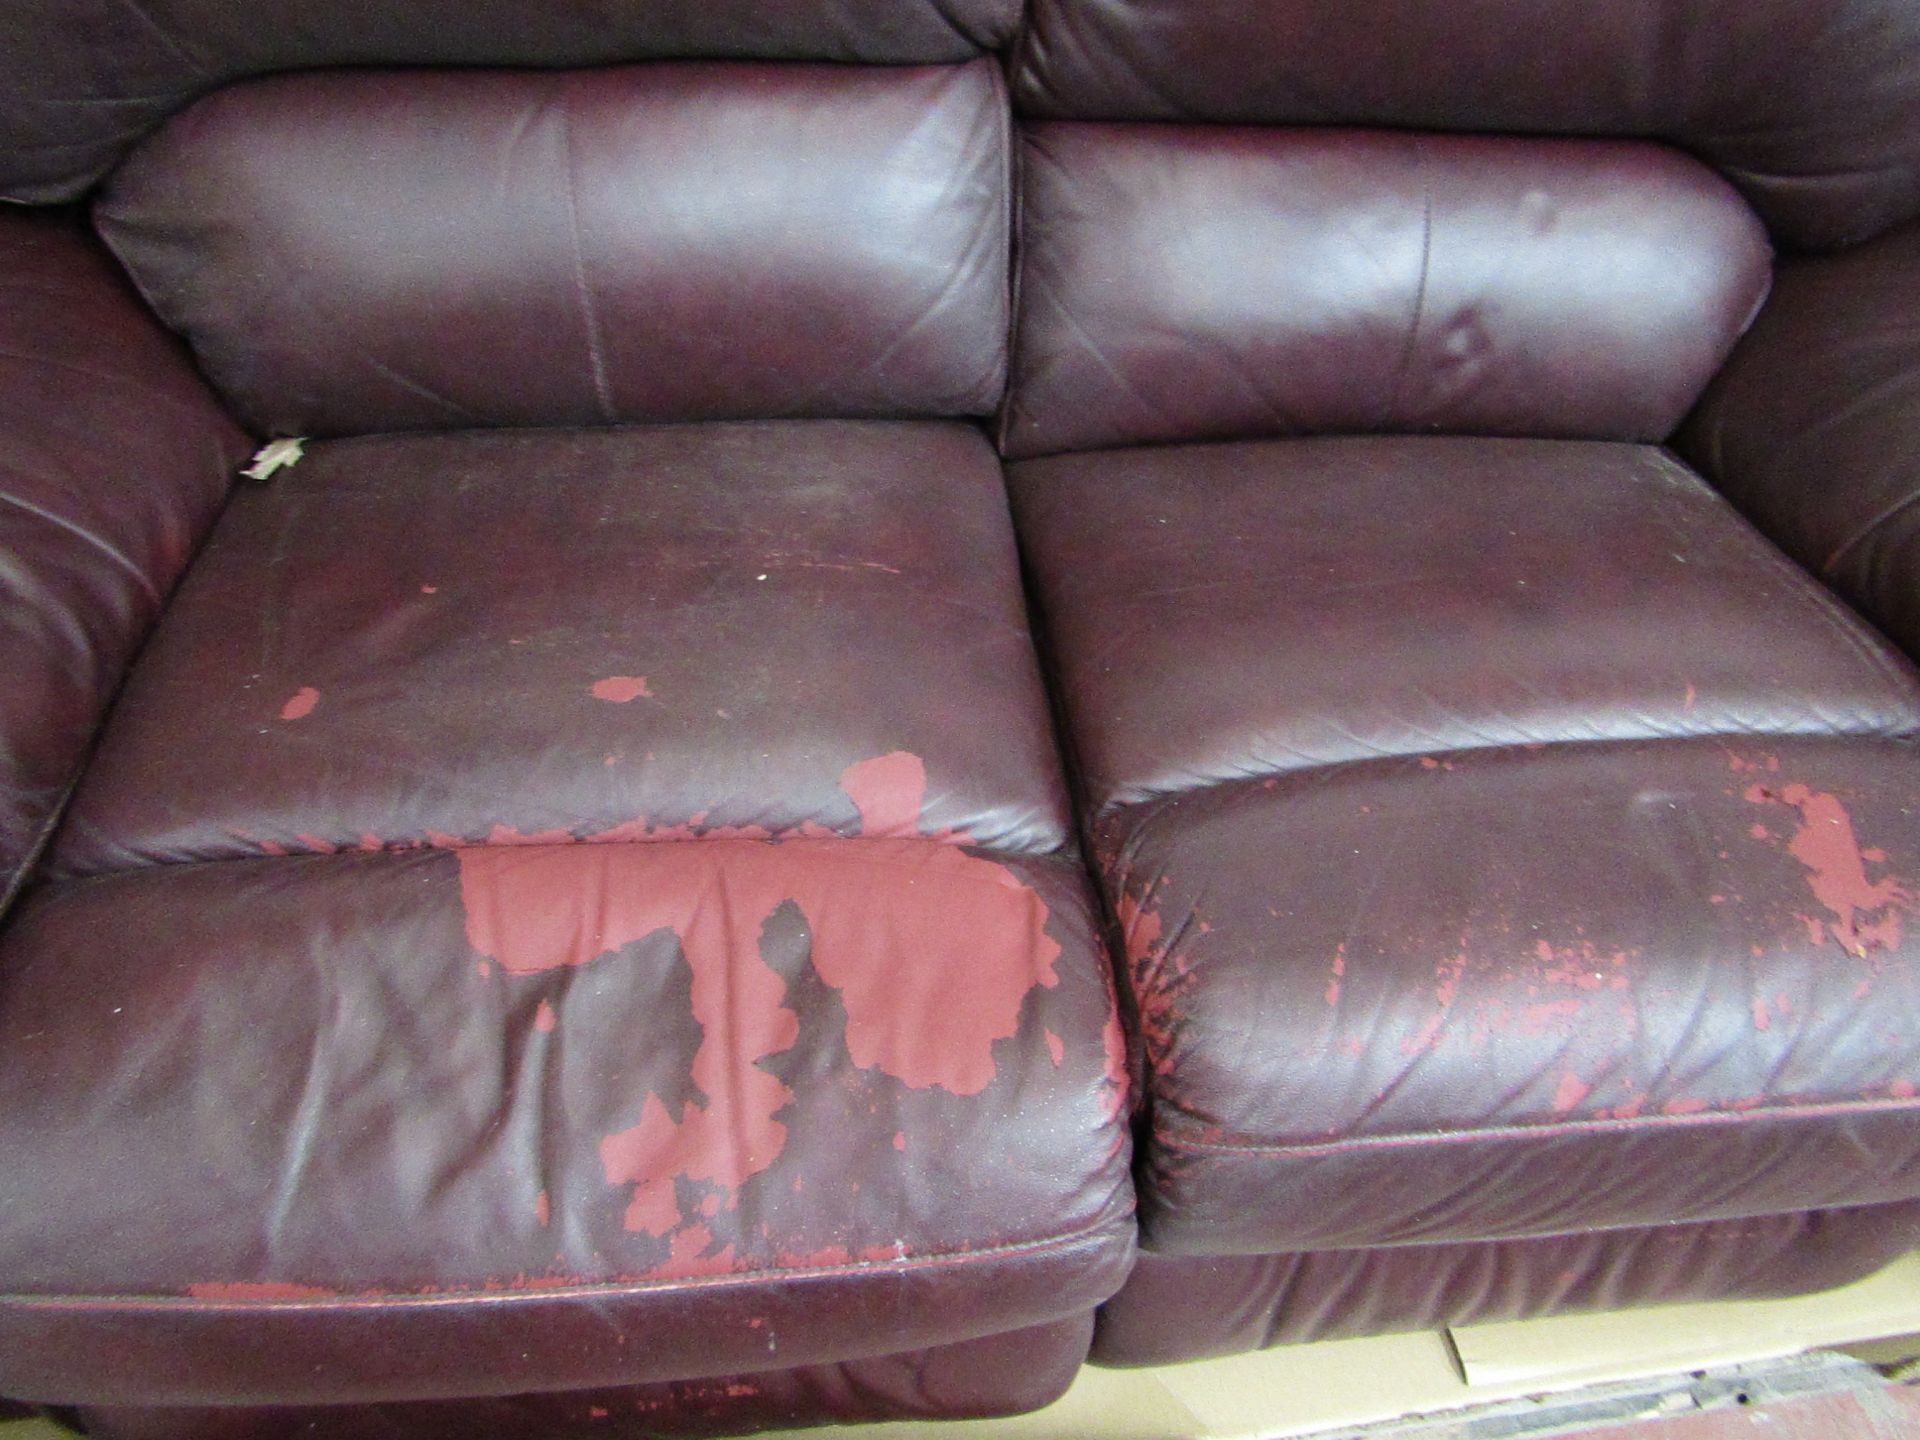 Lazy Boy Oxblood sofa set, includes 2 arm chairs and a 2 seater sofa all have issue with the - Image 4 of 4